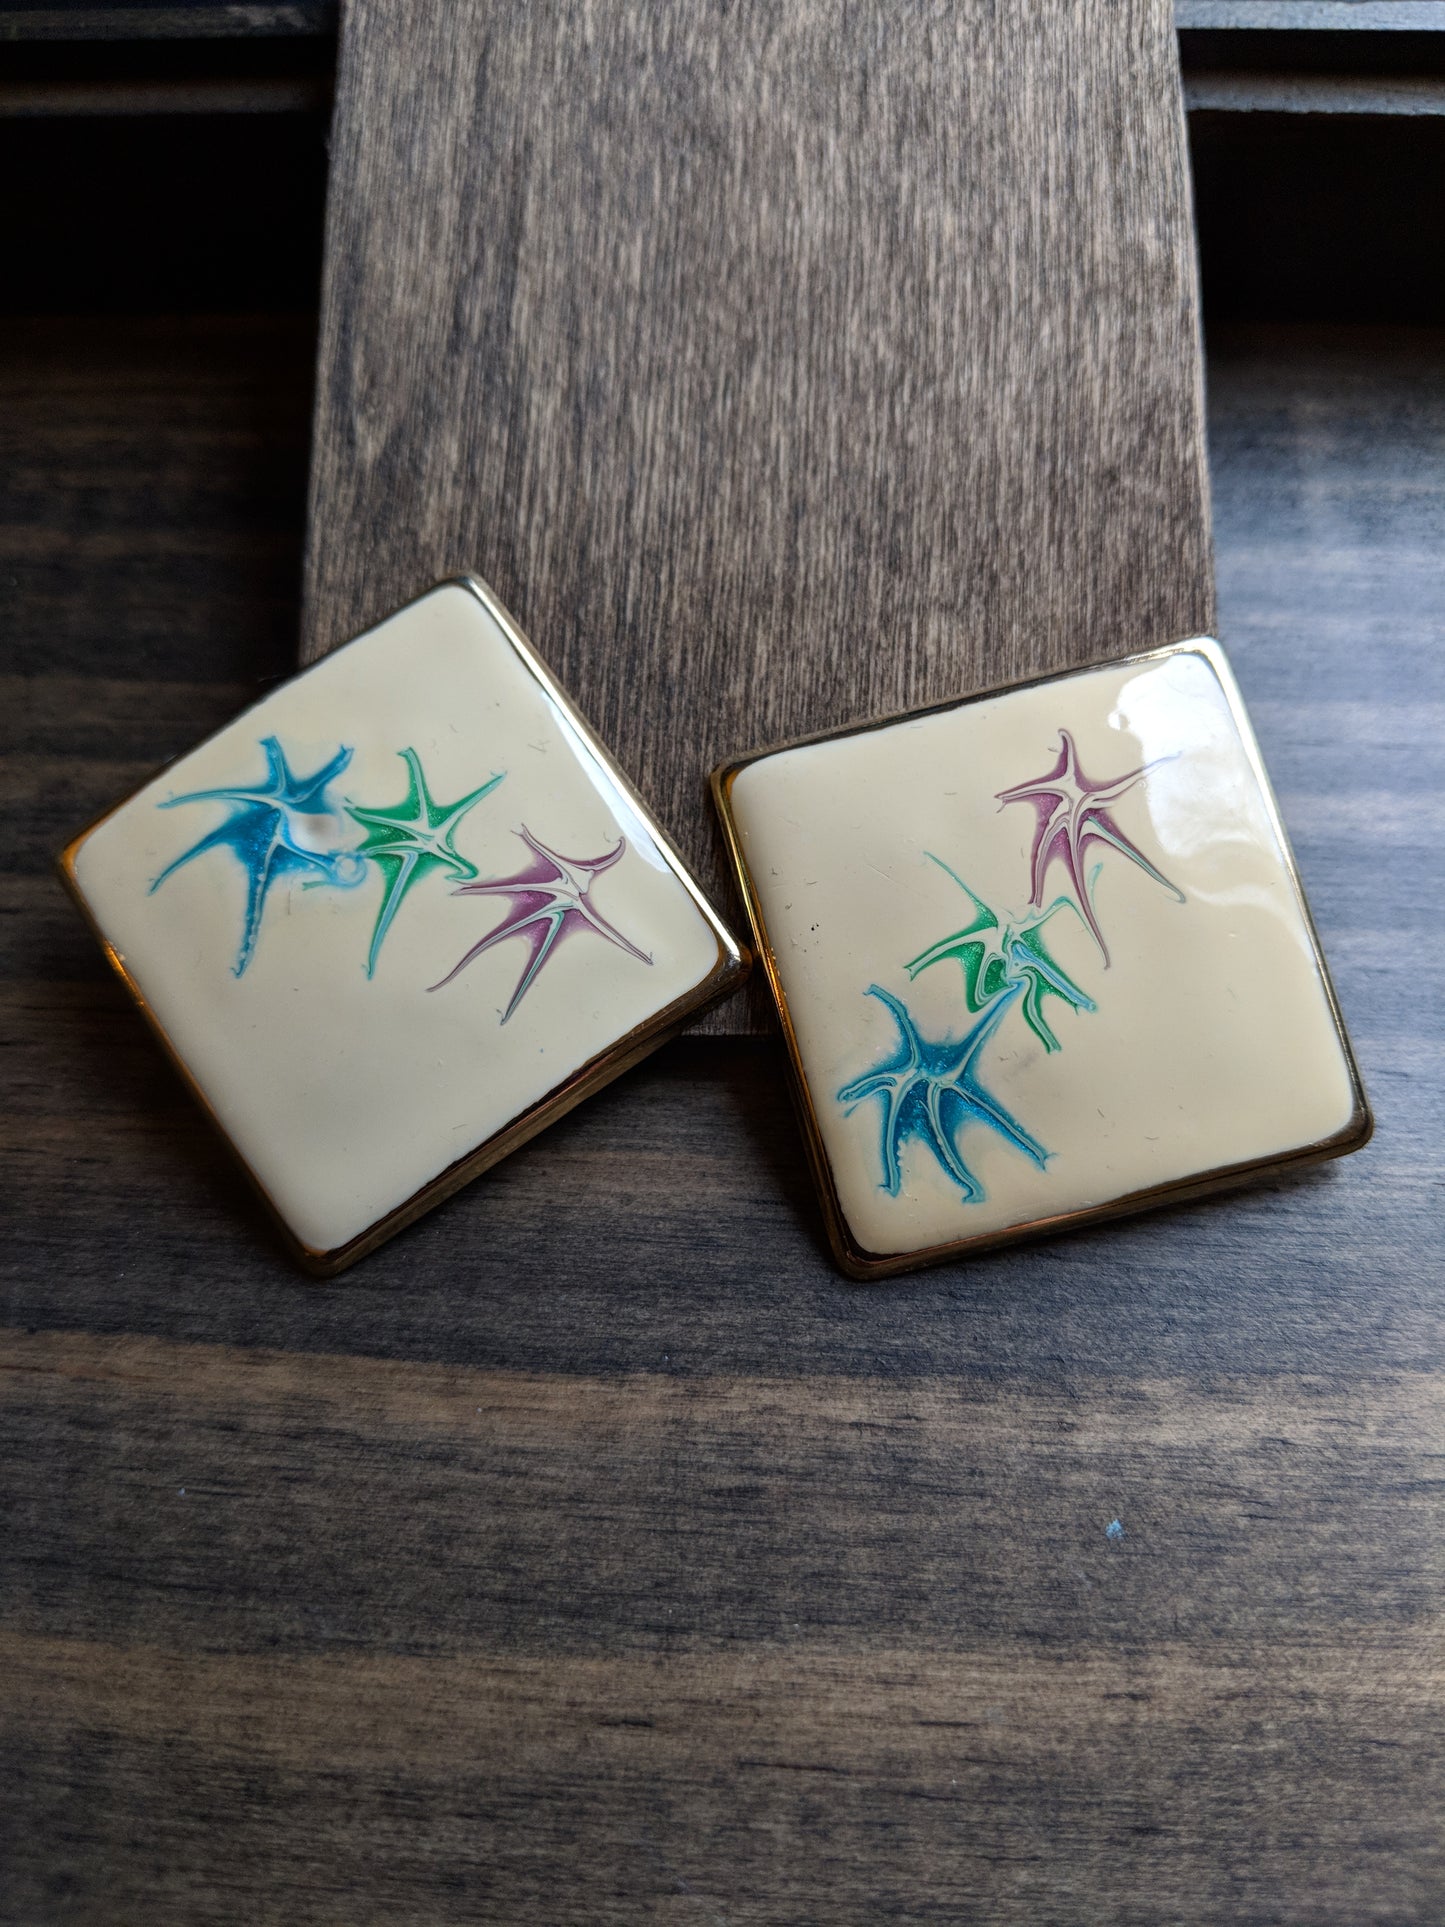 Vintage 80s/90s Square Abstract Enamel Earrings